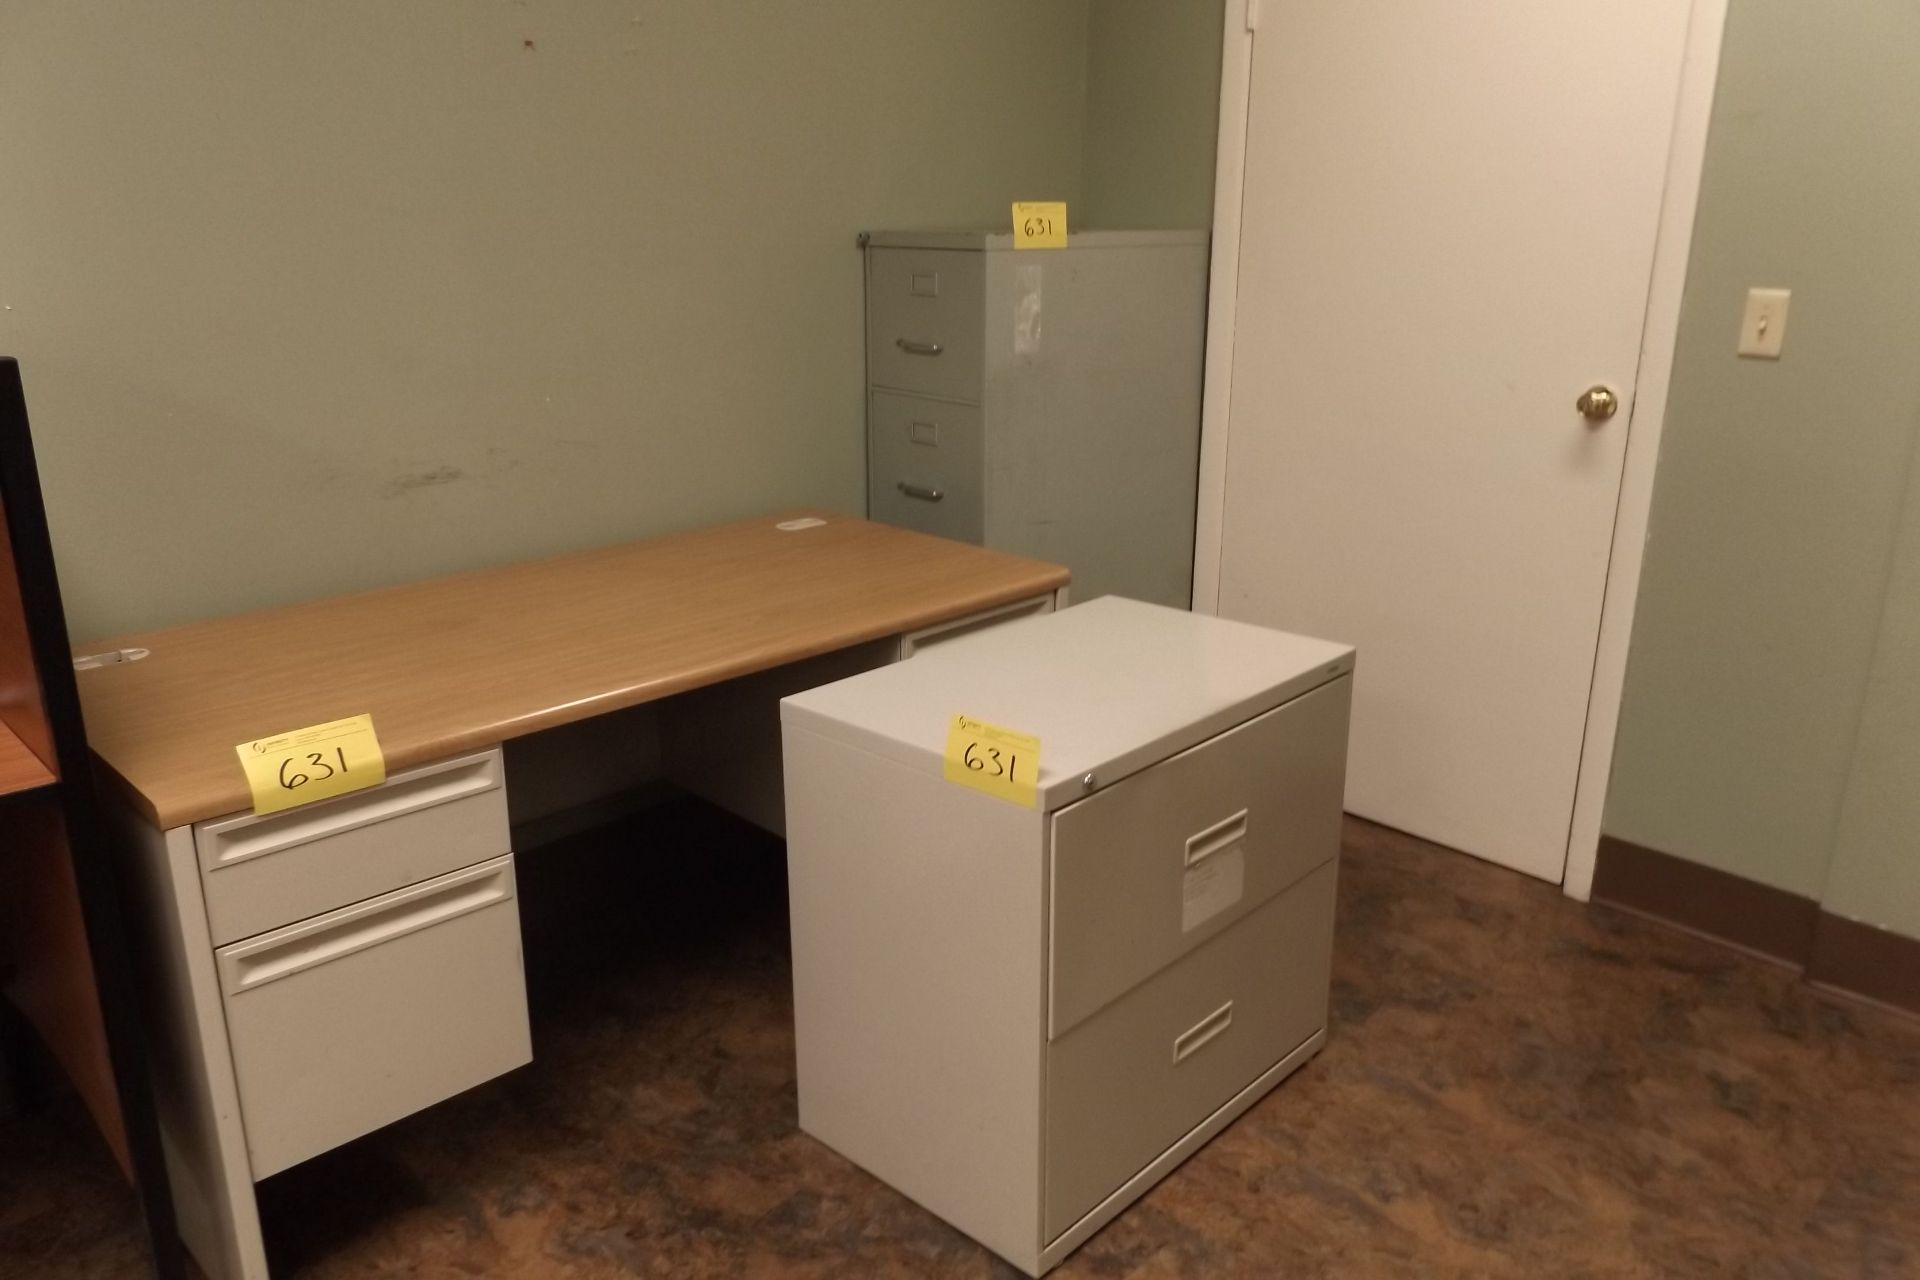 LOT OF ASSORTED OFFICE FURNITURE ,INCLUDED ARE, 1 DESK, 3 METAL FILLING CABINETS, 1 SMALL METAL